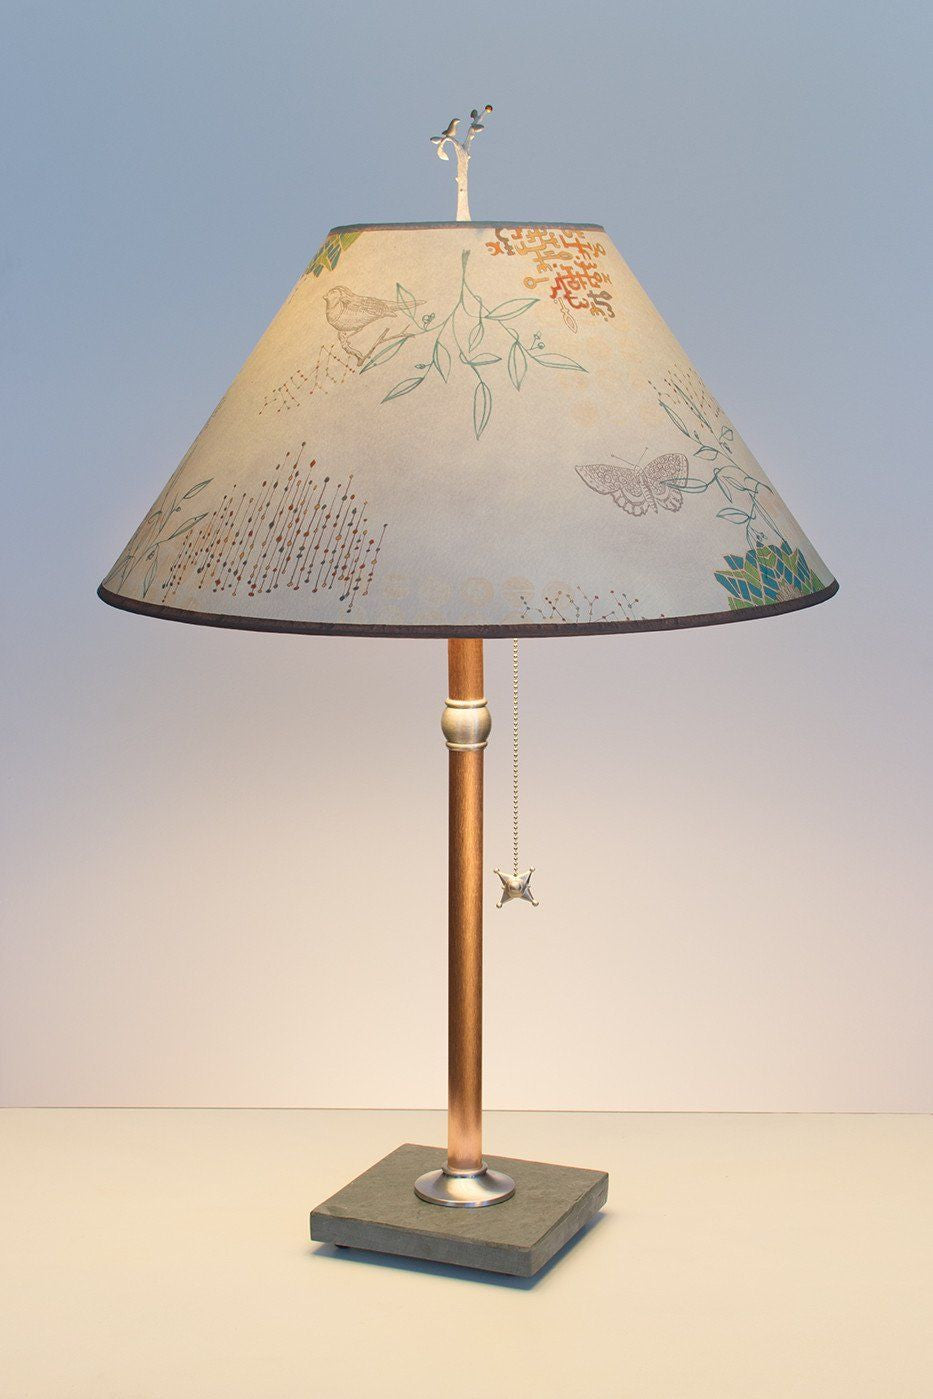 Copper Table Lamp on Vermont Slate with Large Conical Shade in Ecru Journey